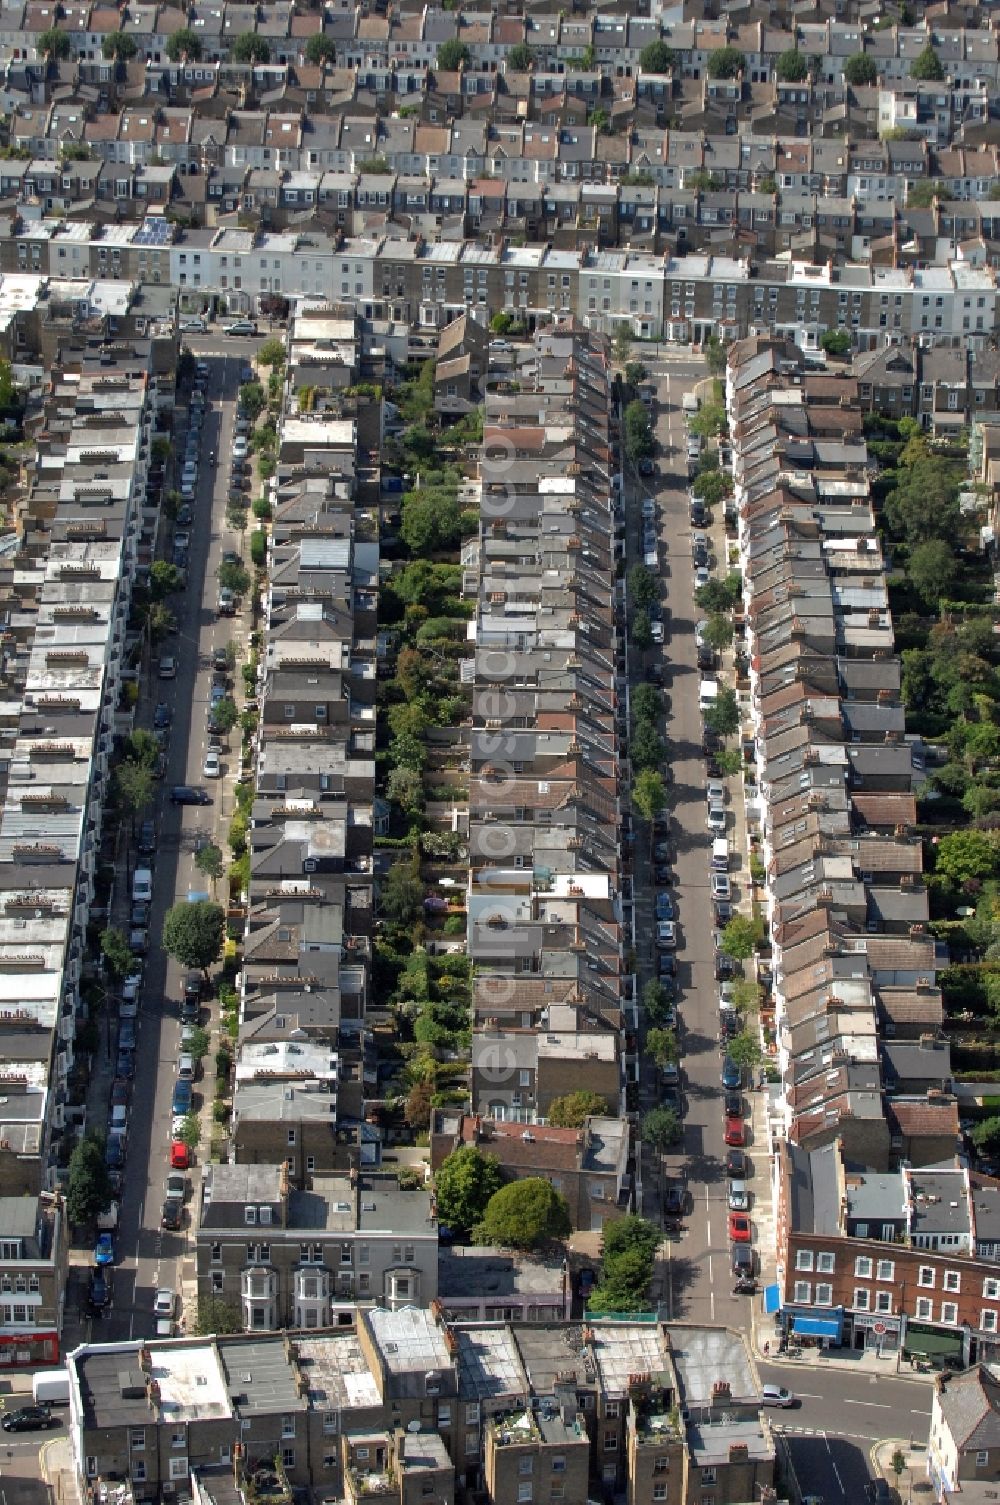 London from above - View of residential areas in the district Fulham, London. You can see various residential complexes with row houses